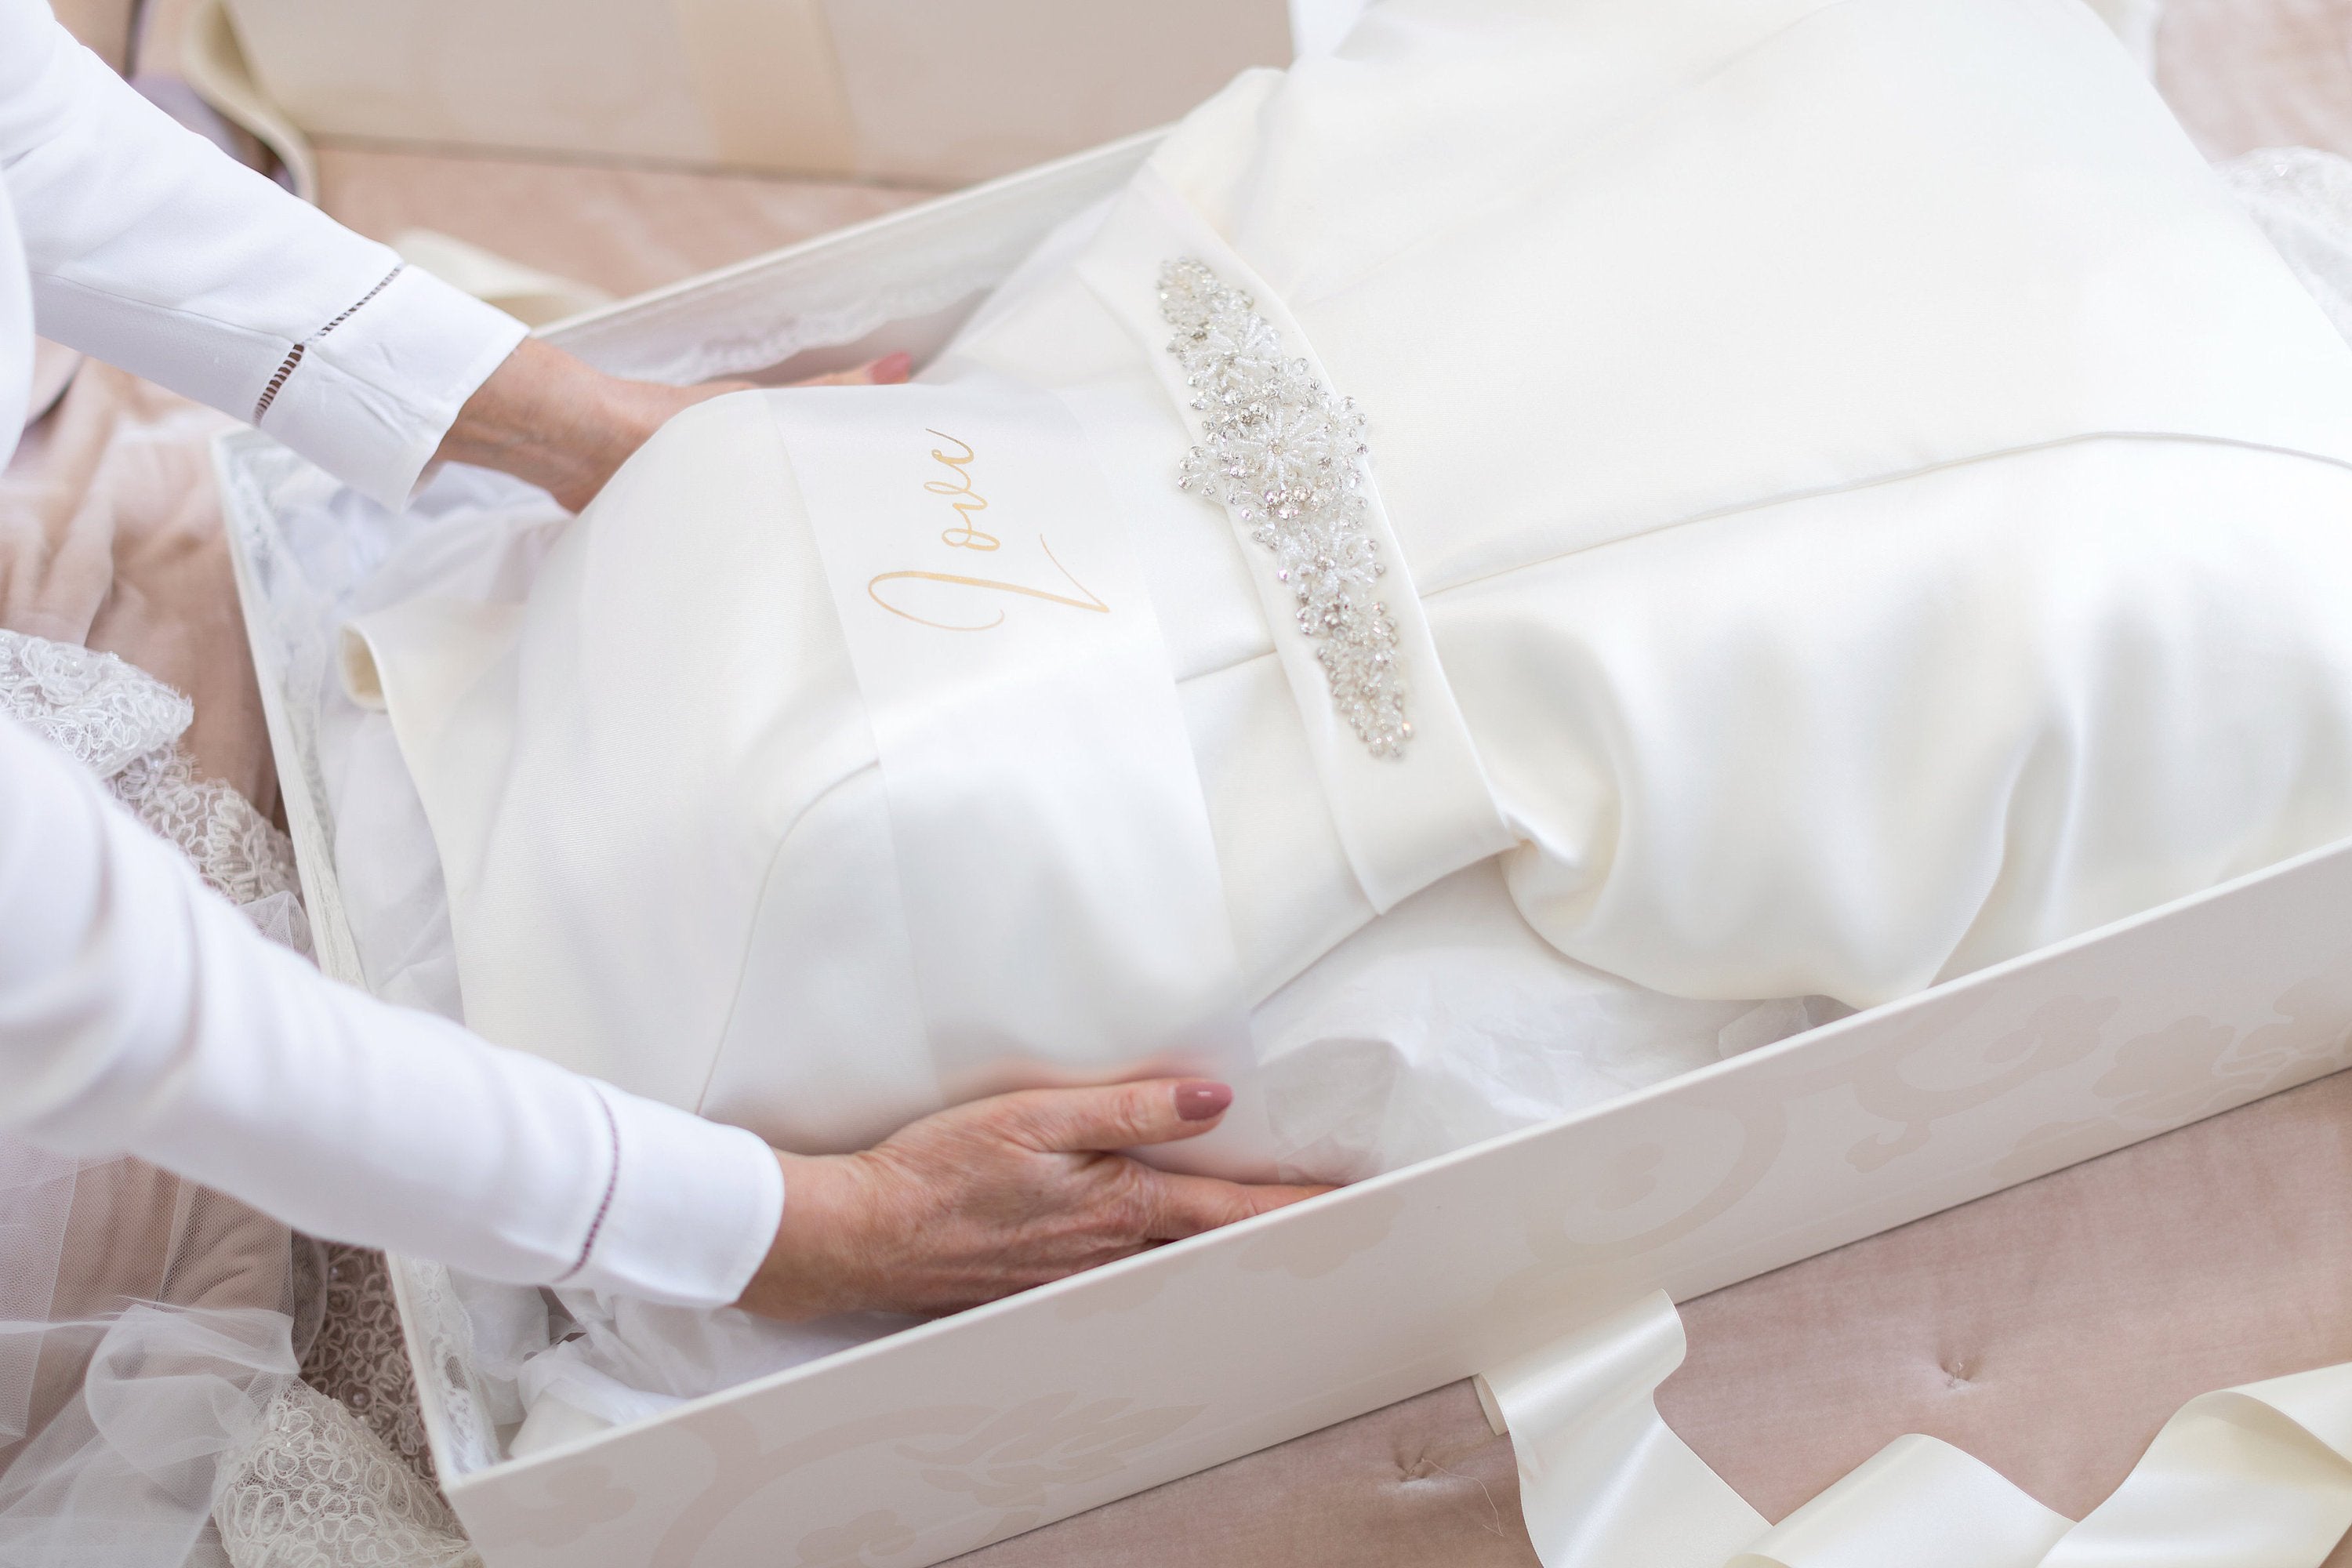 Wedding Dress Cleaning Package - The Dress Cleaning Company